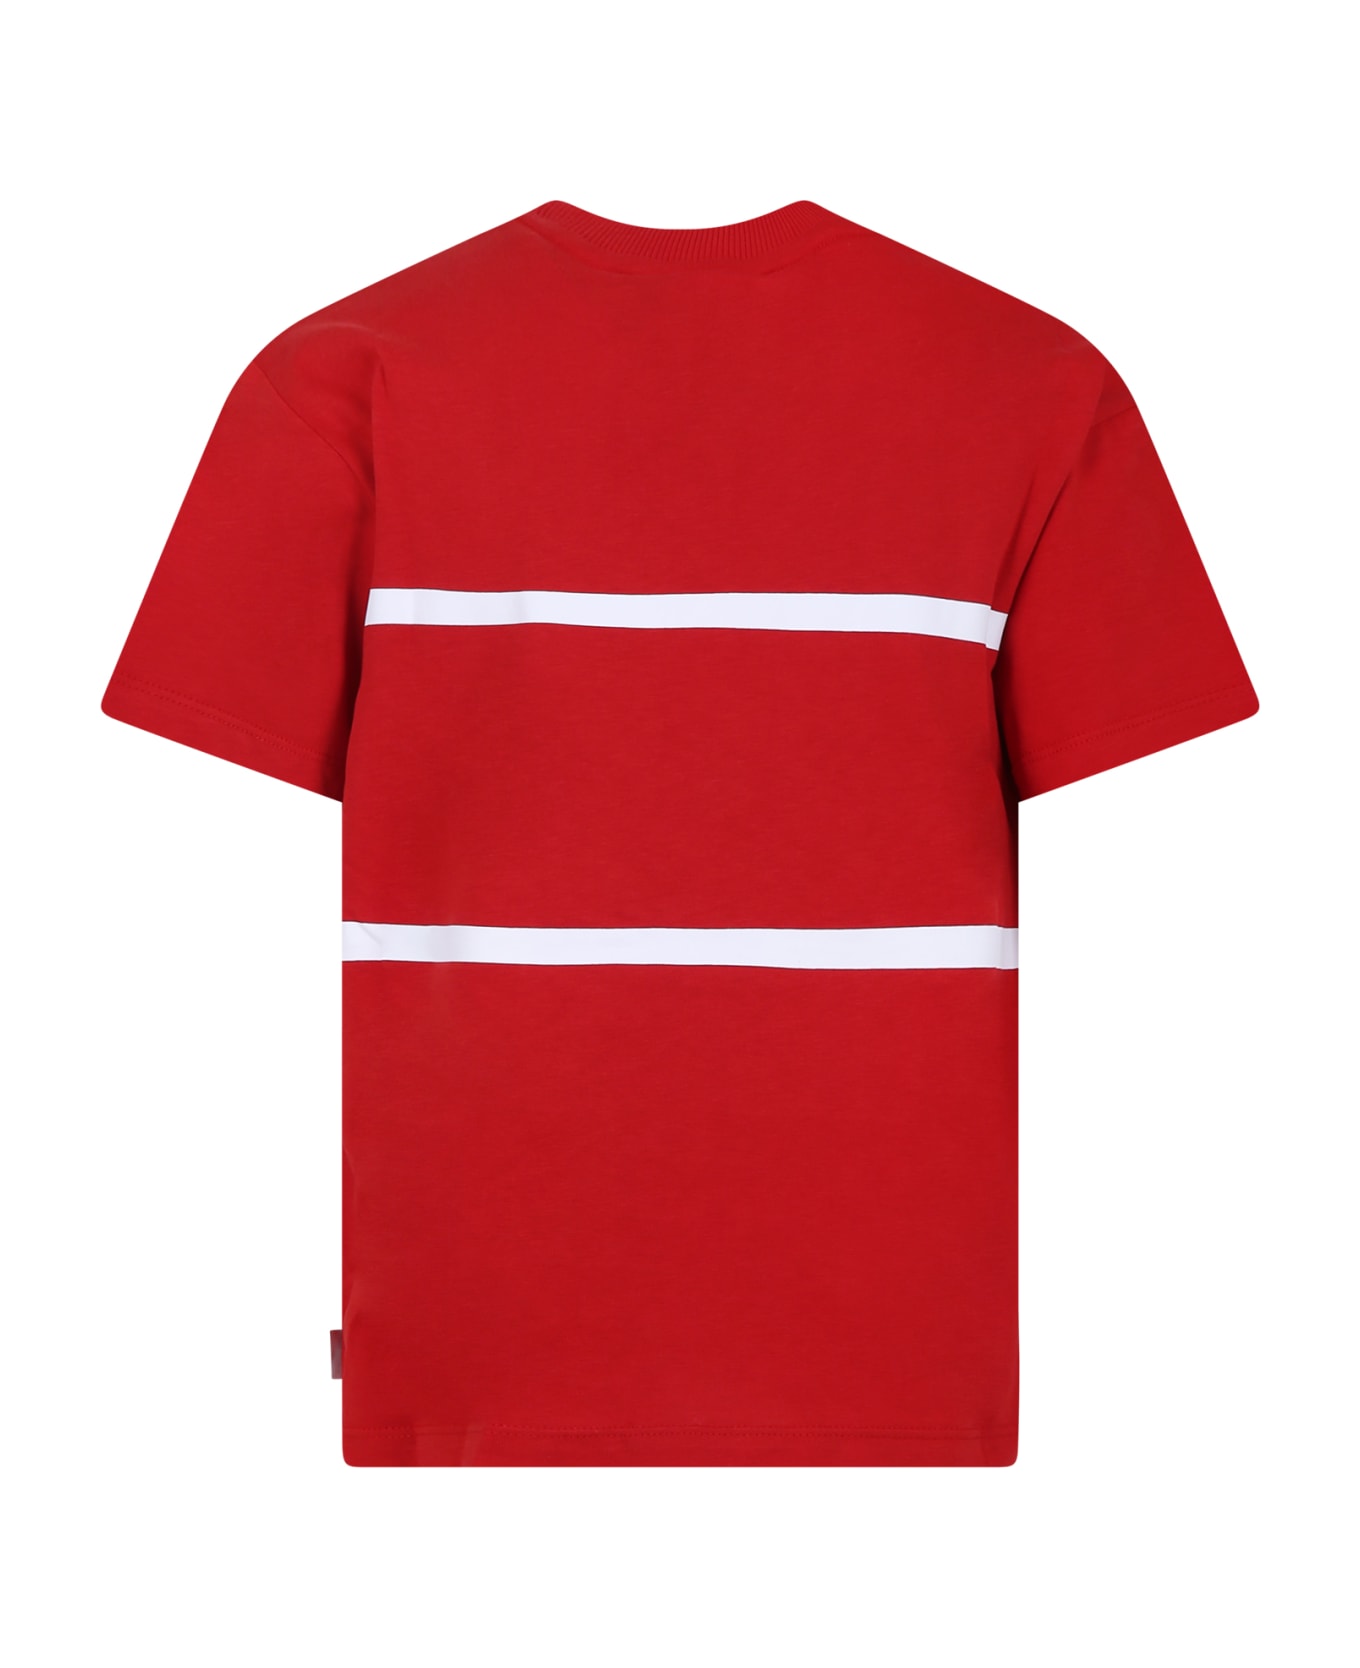 GCDS Mini Red T-shirt For Kids With Logo - Red